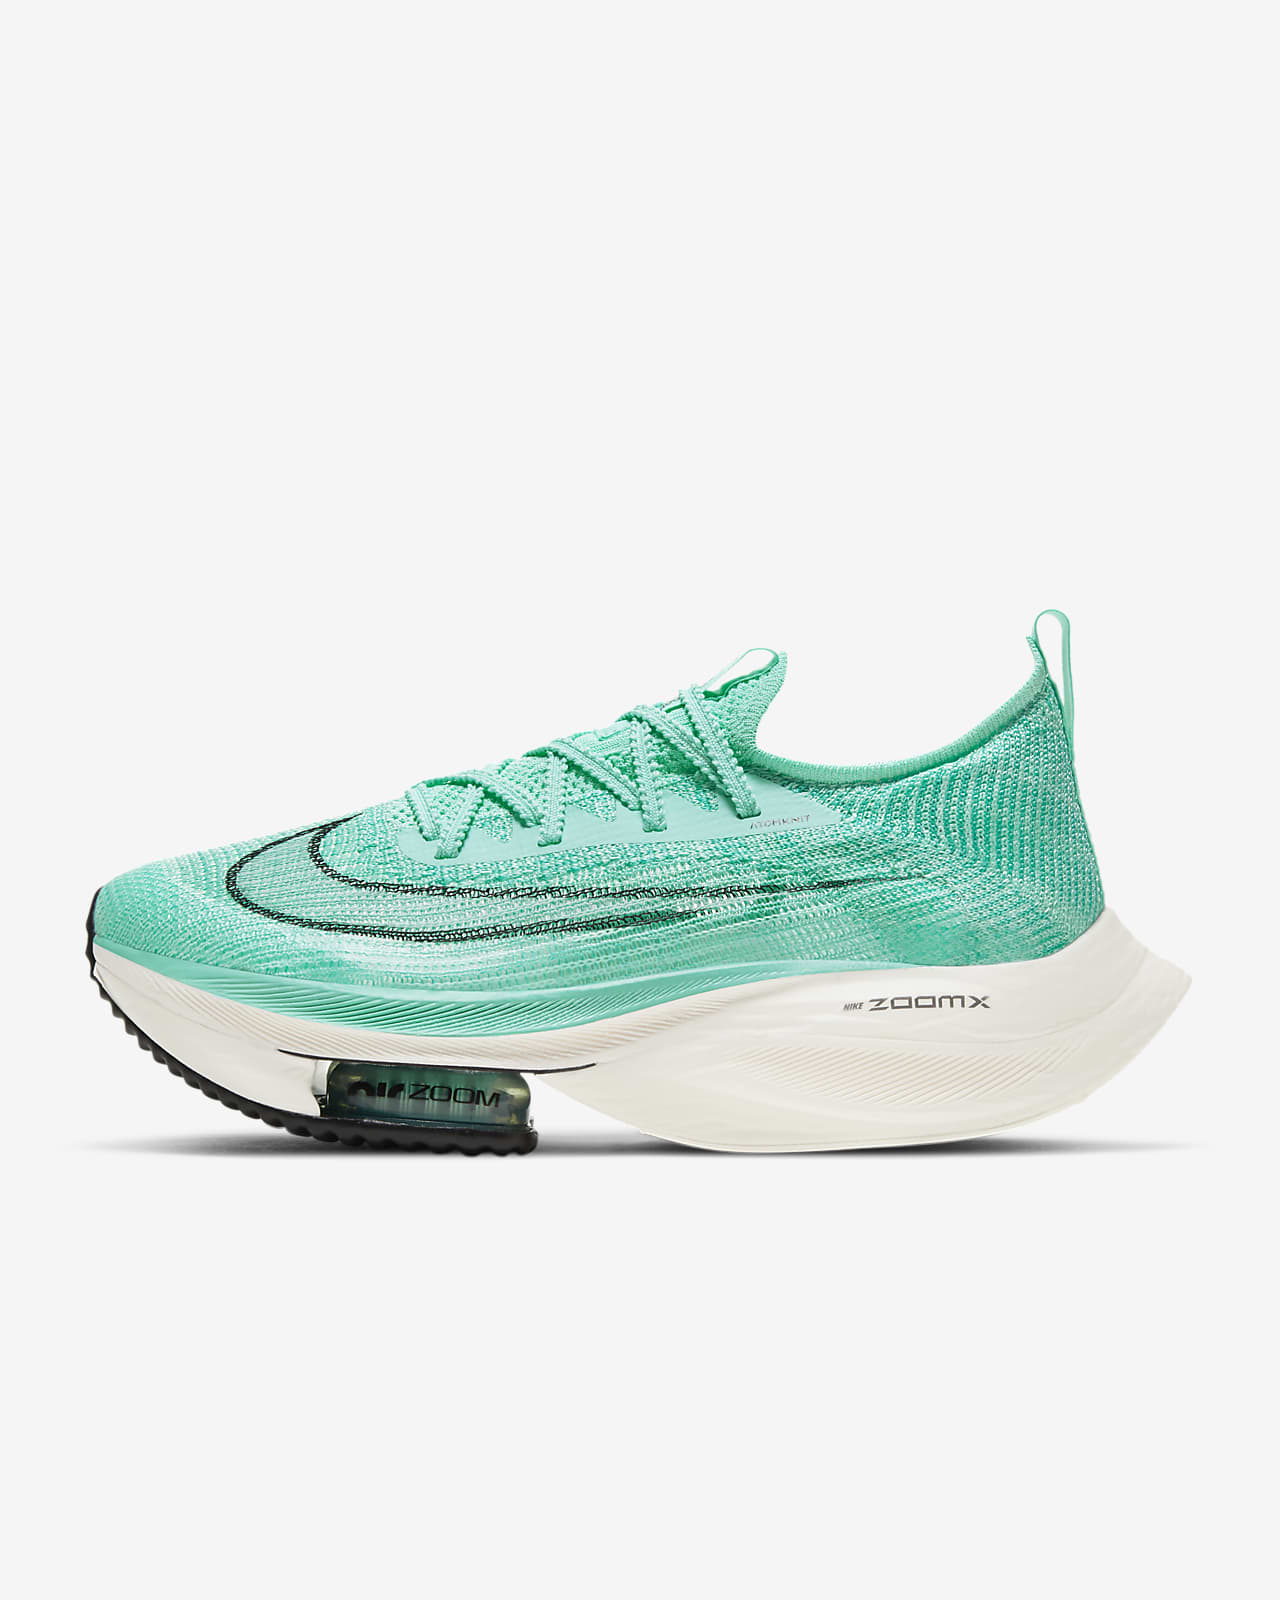 nike zoomx alphafly next release date